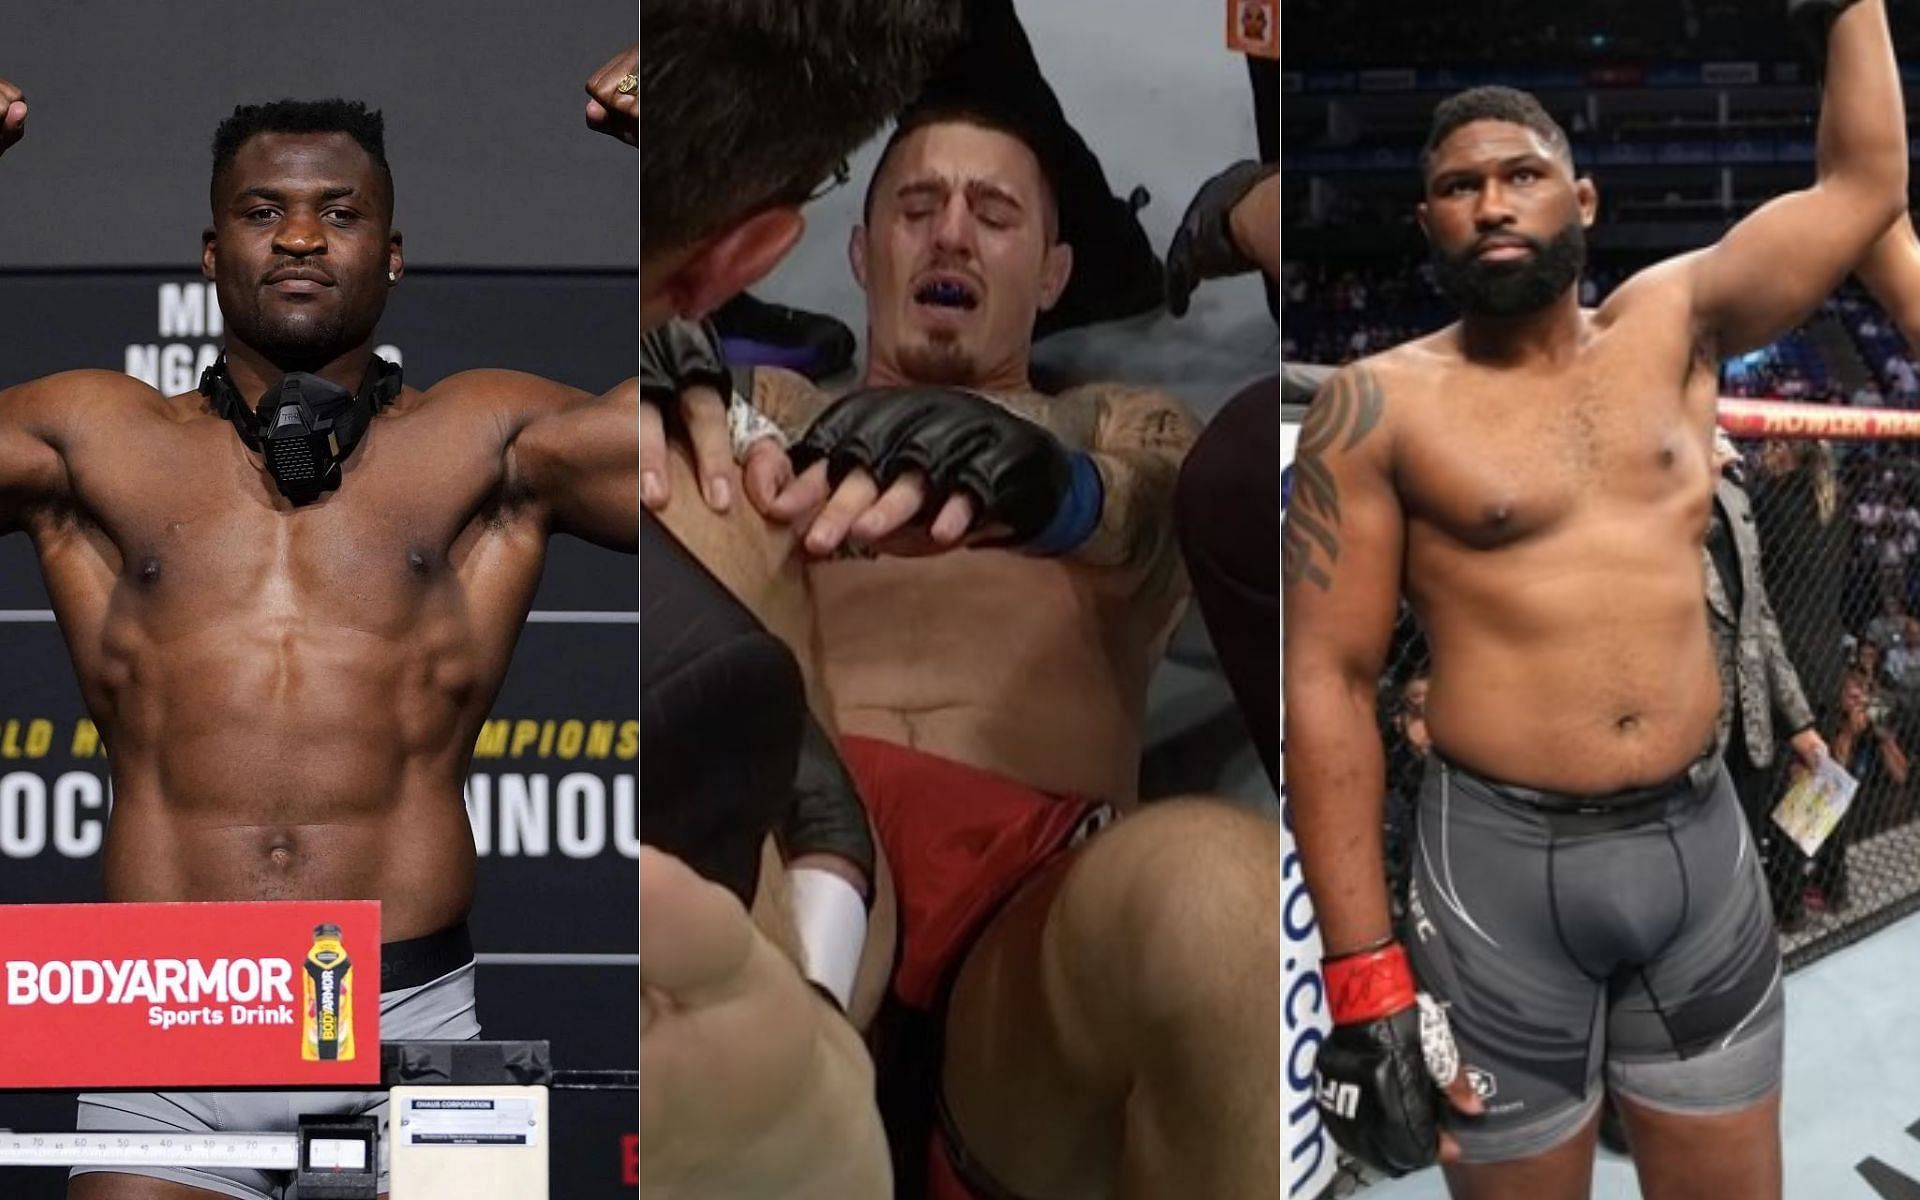 From left to right: Francis Ngannou, Tom Aspinall, and Curtis Blaydes [Image credits: @MikeBohn on Twitter and @ufc on Instagram]